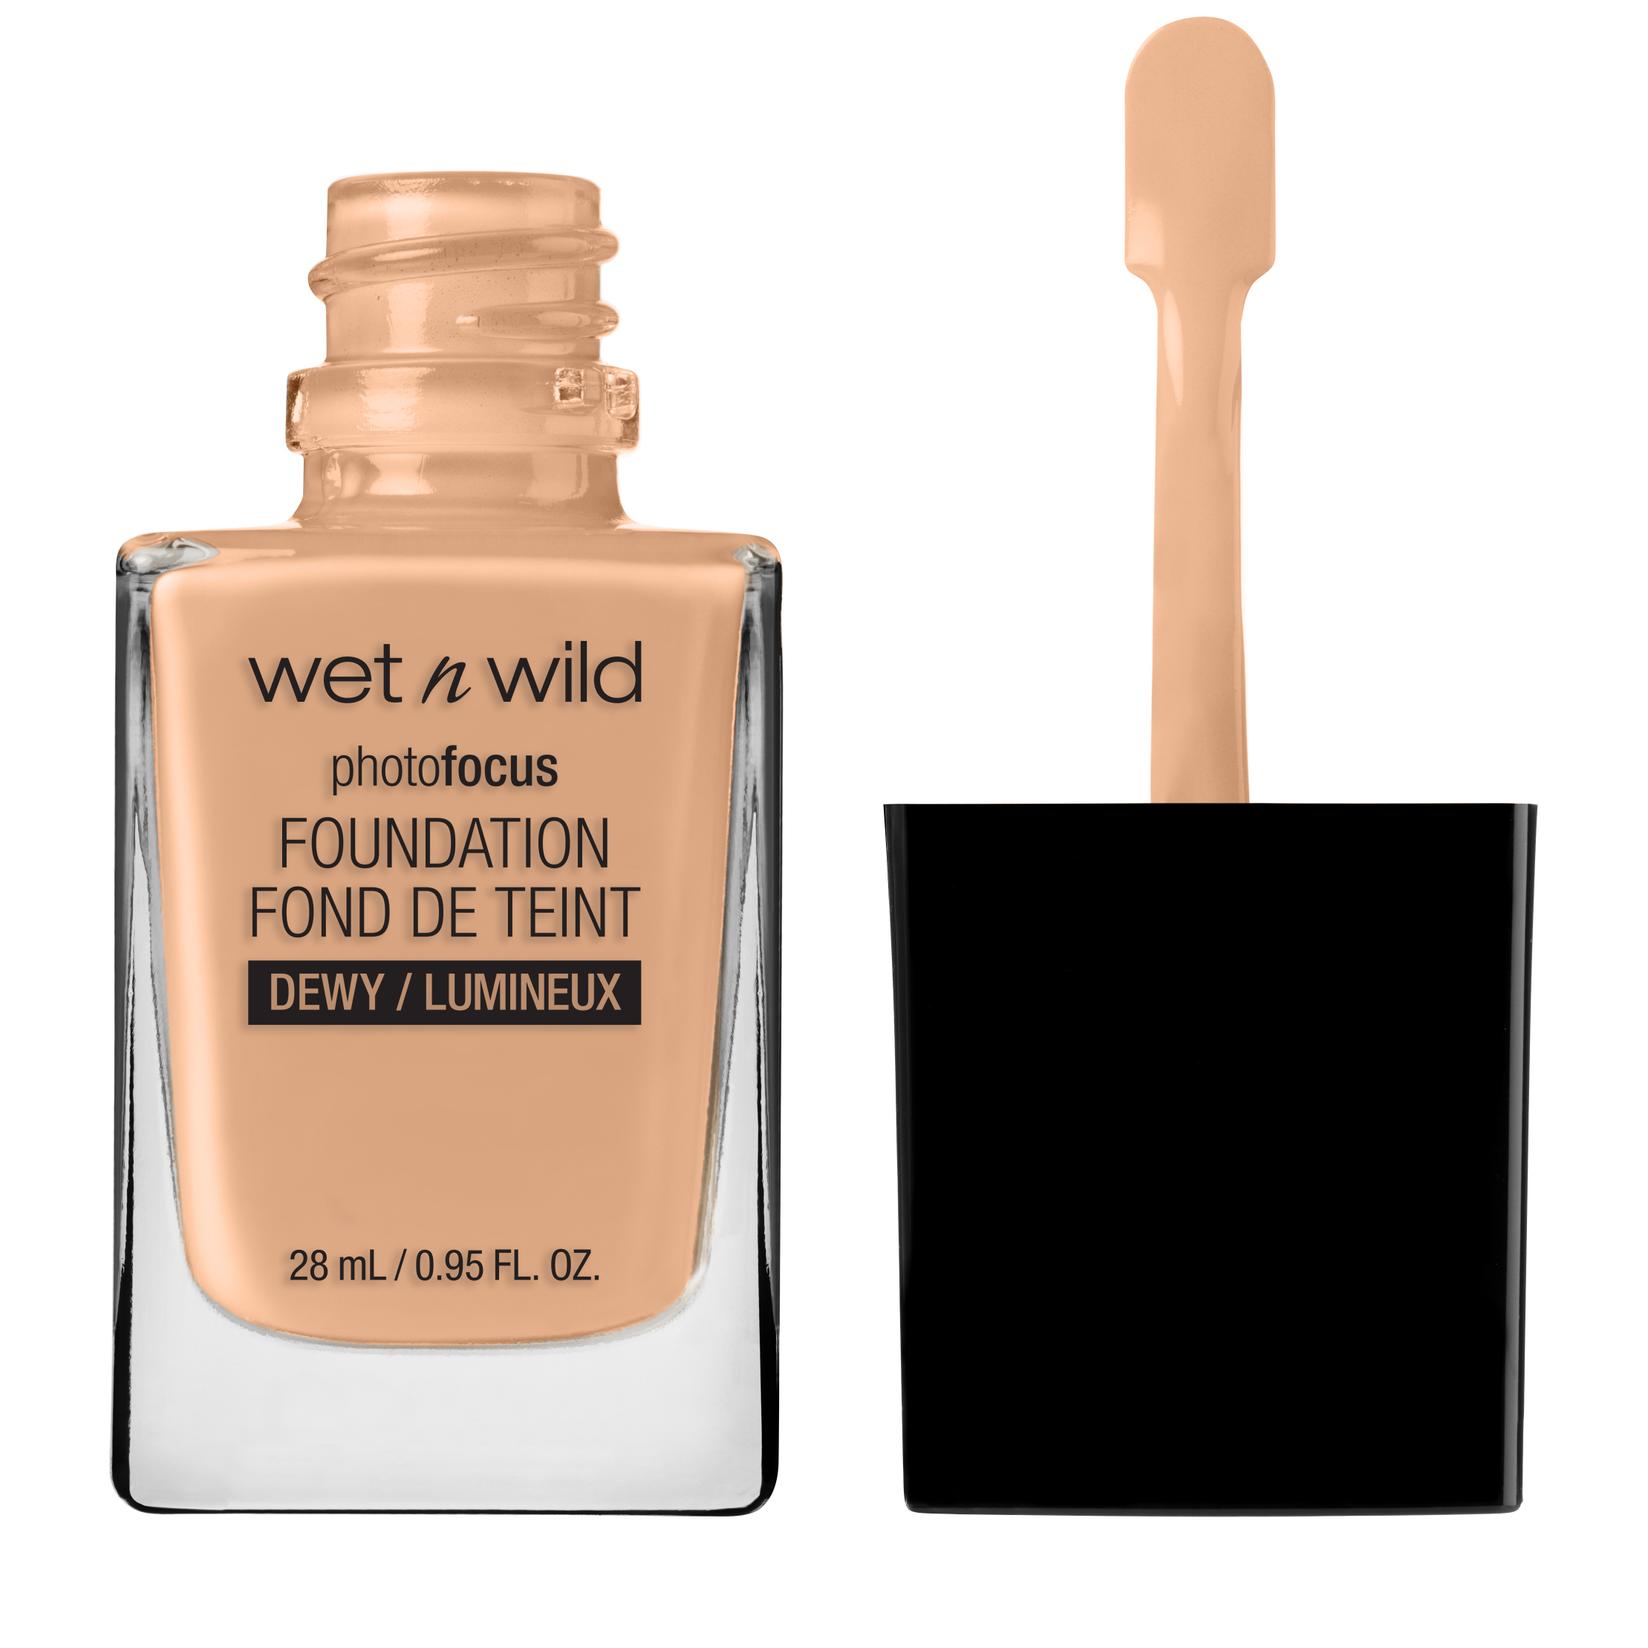 Selected image for wet n wild photofocus Dewy Lumineux Tečni puder, 1111527E Classic beige, 28 ml